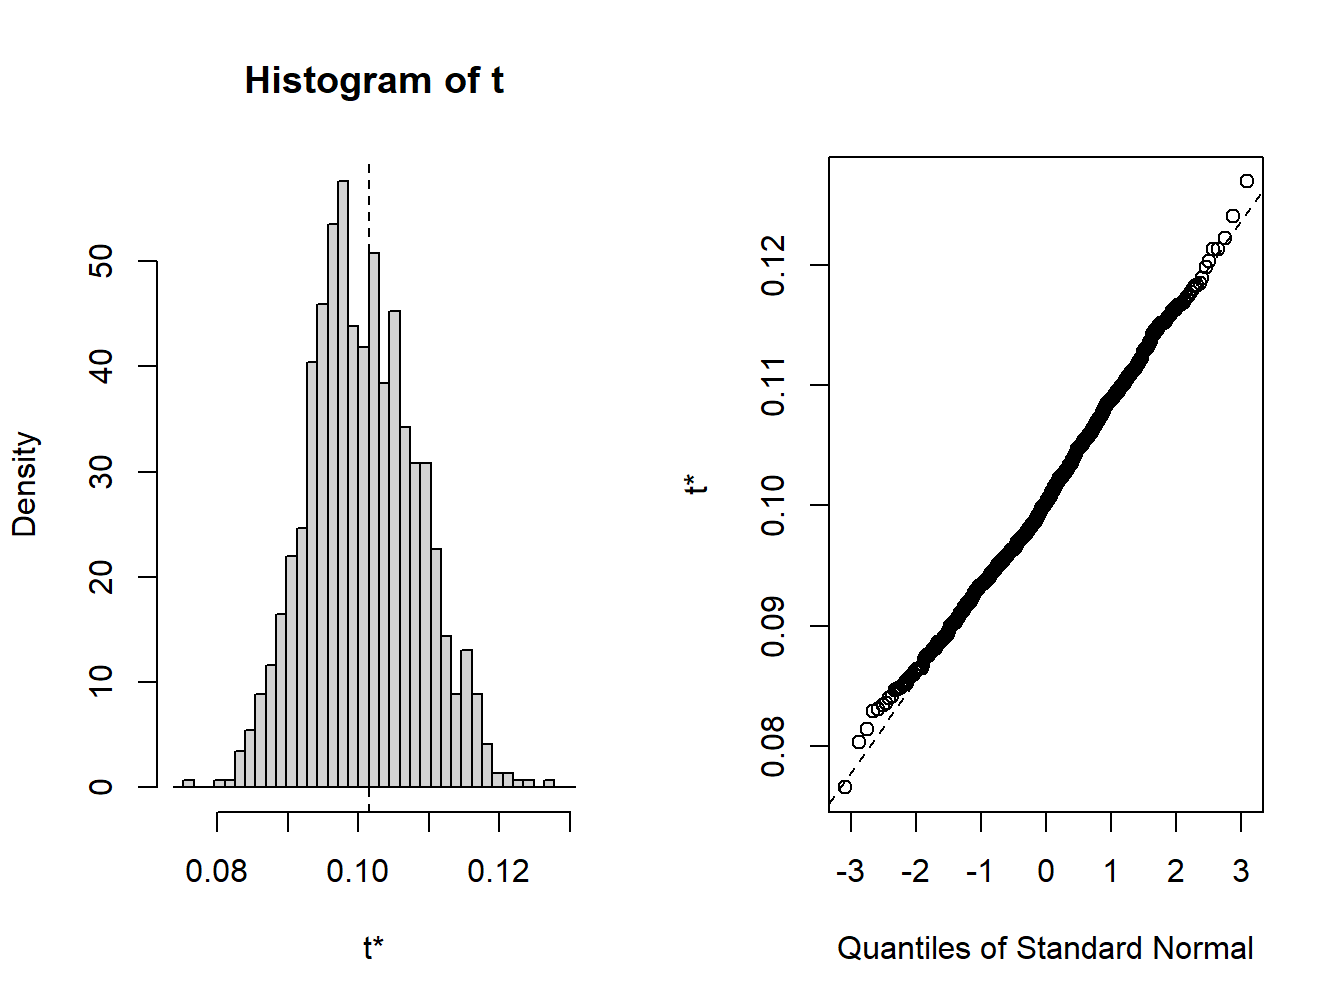 Bootstrap distribution for $\hat{\sigma}$